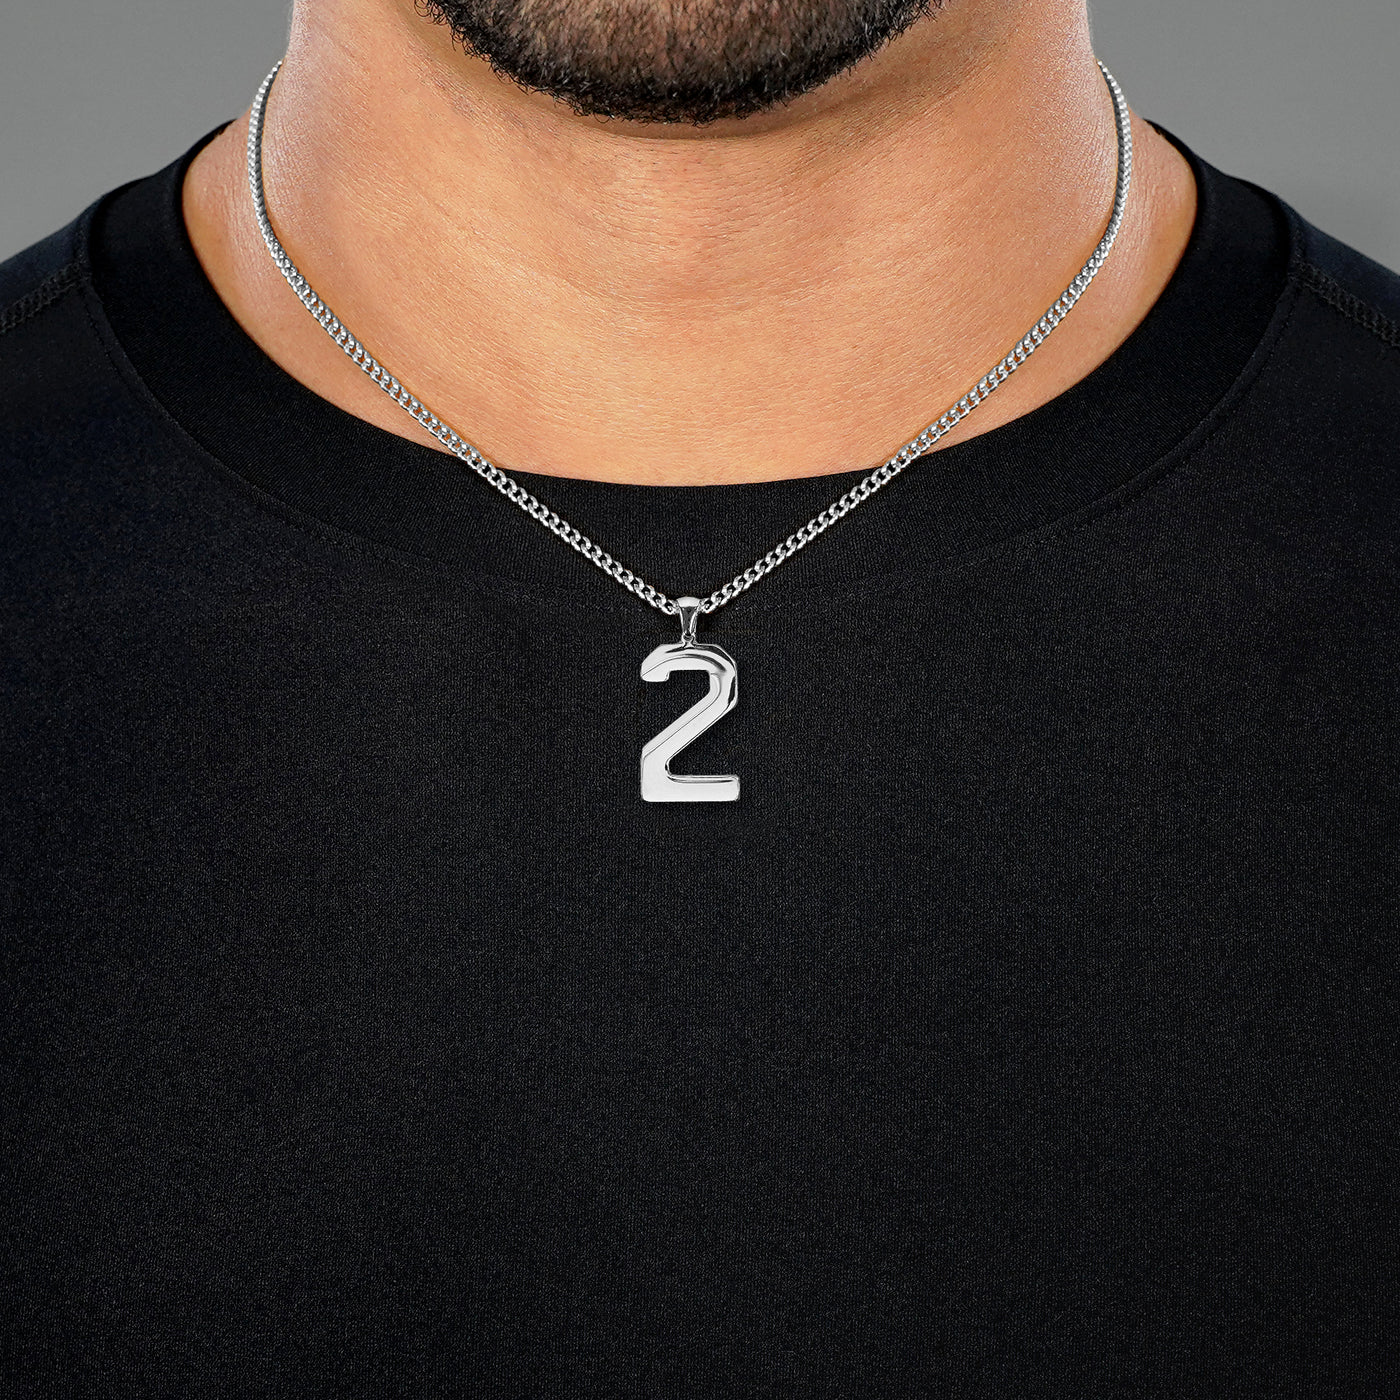 2 Number Pendant with Chain Necklace - Stainless Steel